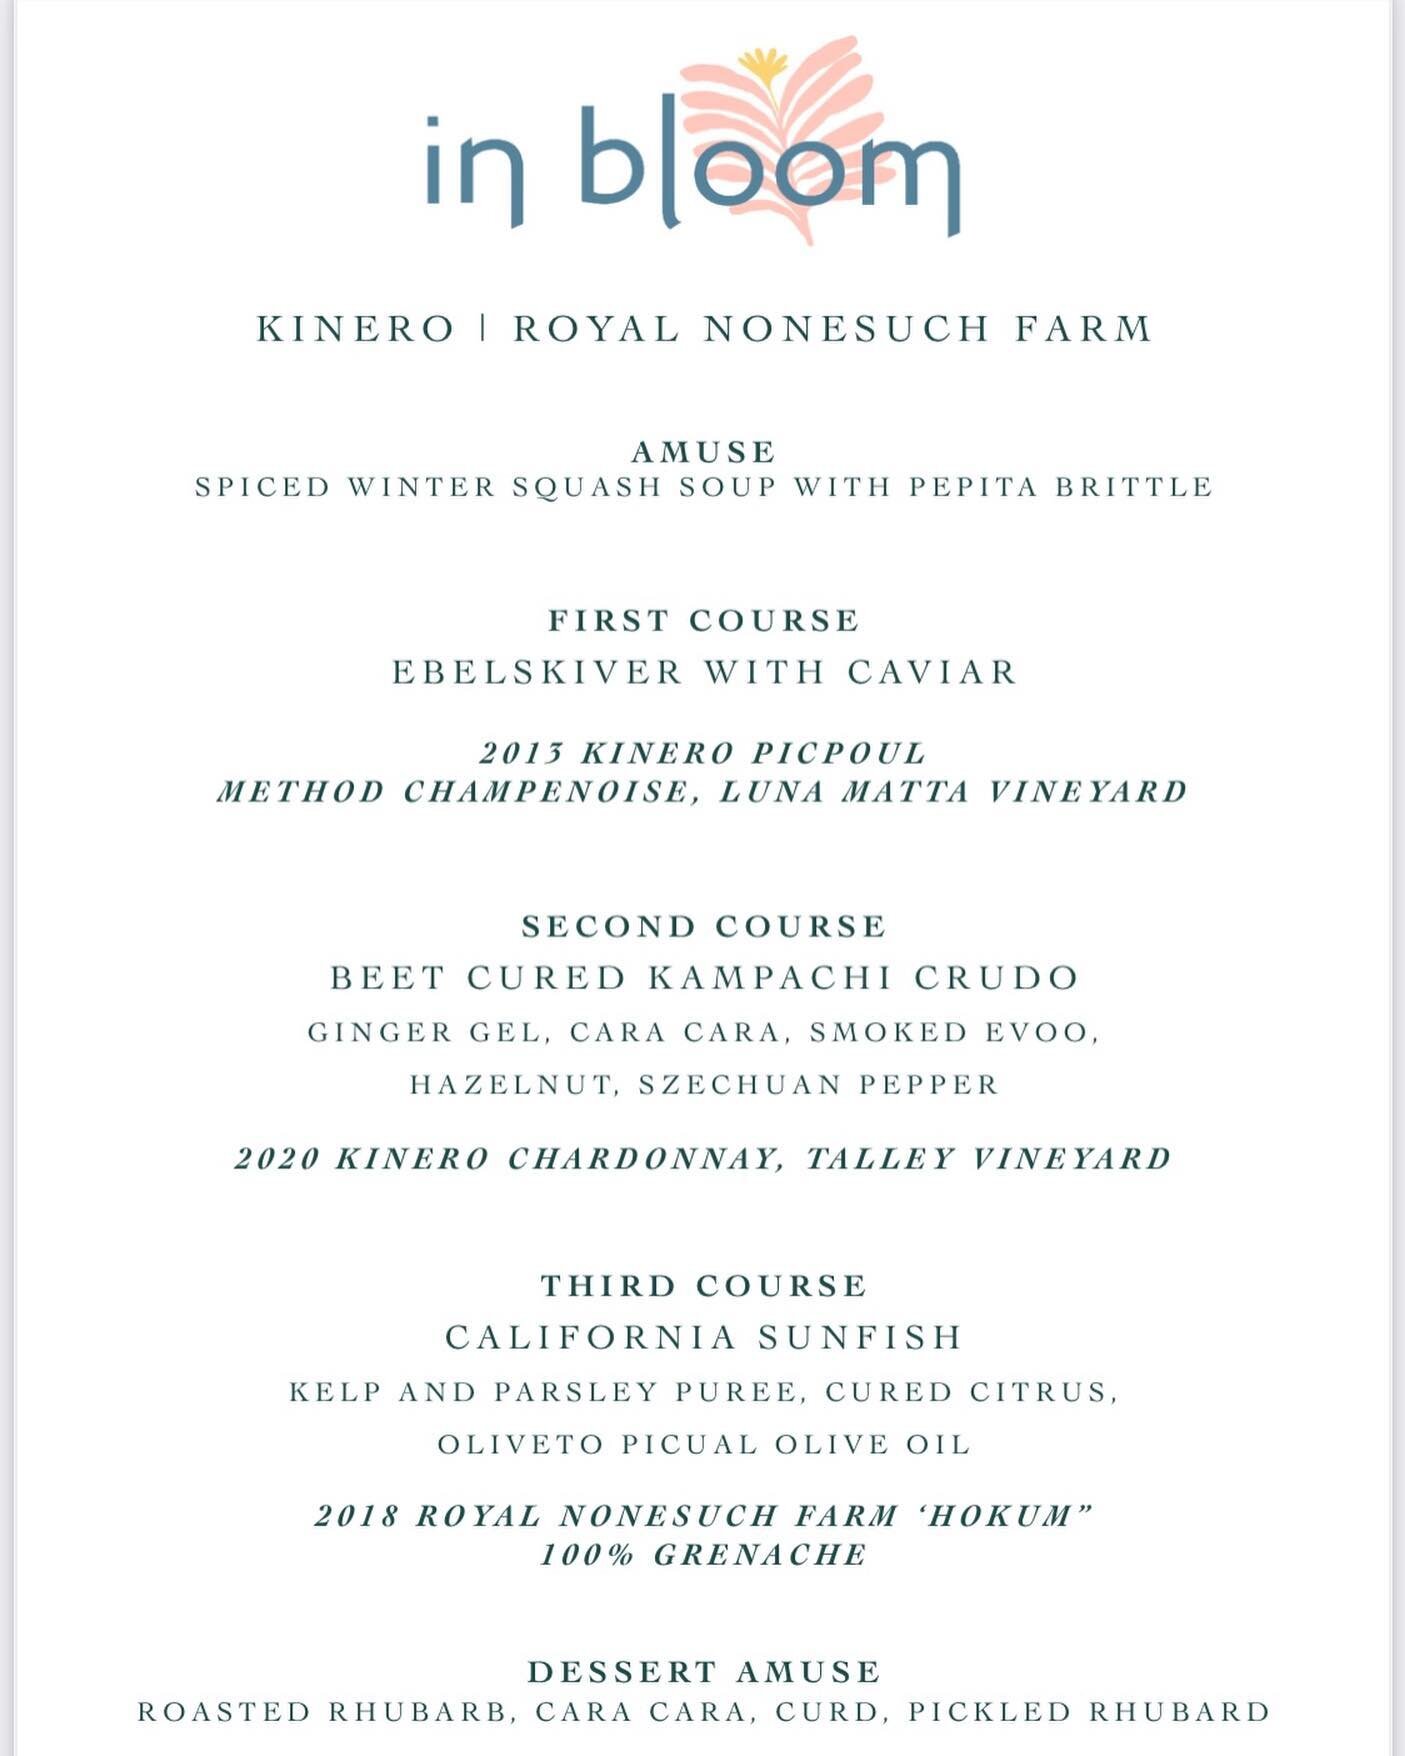 It takes a lot to get Hillary and I off the mountain these days, but we couldn&rsquo;t be more excited to get out and dine at In Bloom! We hope you can join us on Thursday, January 20th for a 4+ course winemaker dinner with chefs Kenny Seliger and Ro